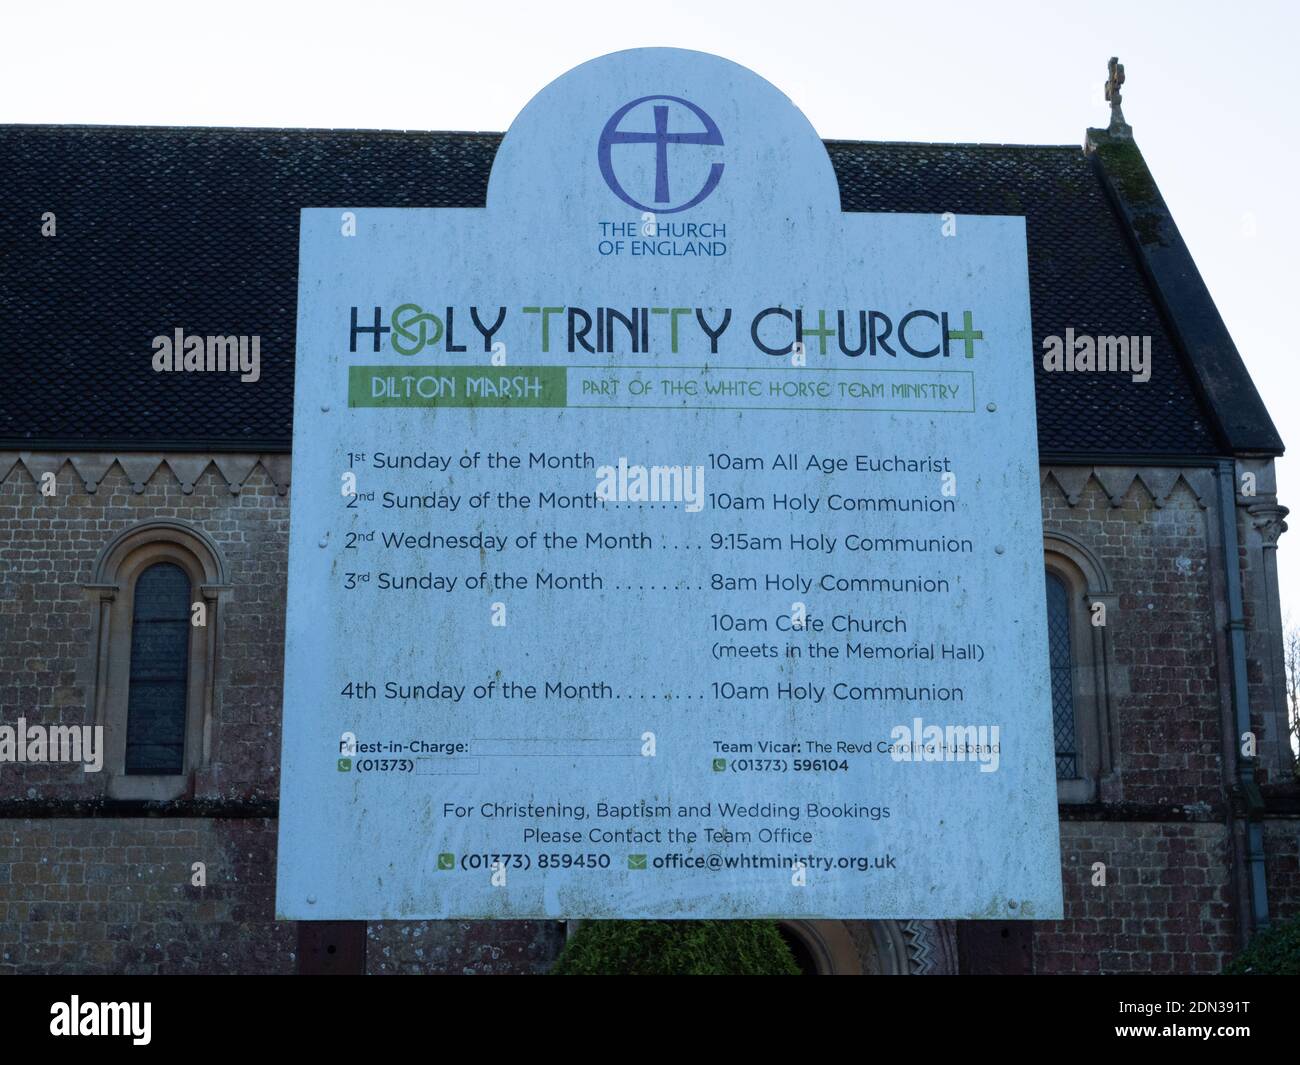 Information board for Holy Trinity Church, part of The White Horse Team Ministry, Dilton Marsh, Wiltshire, England, UK. Stock Photo